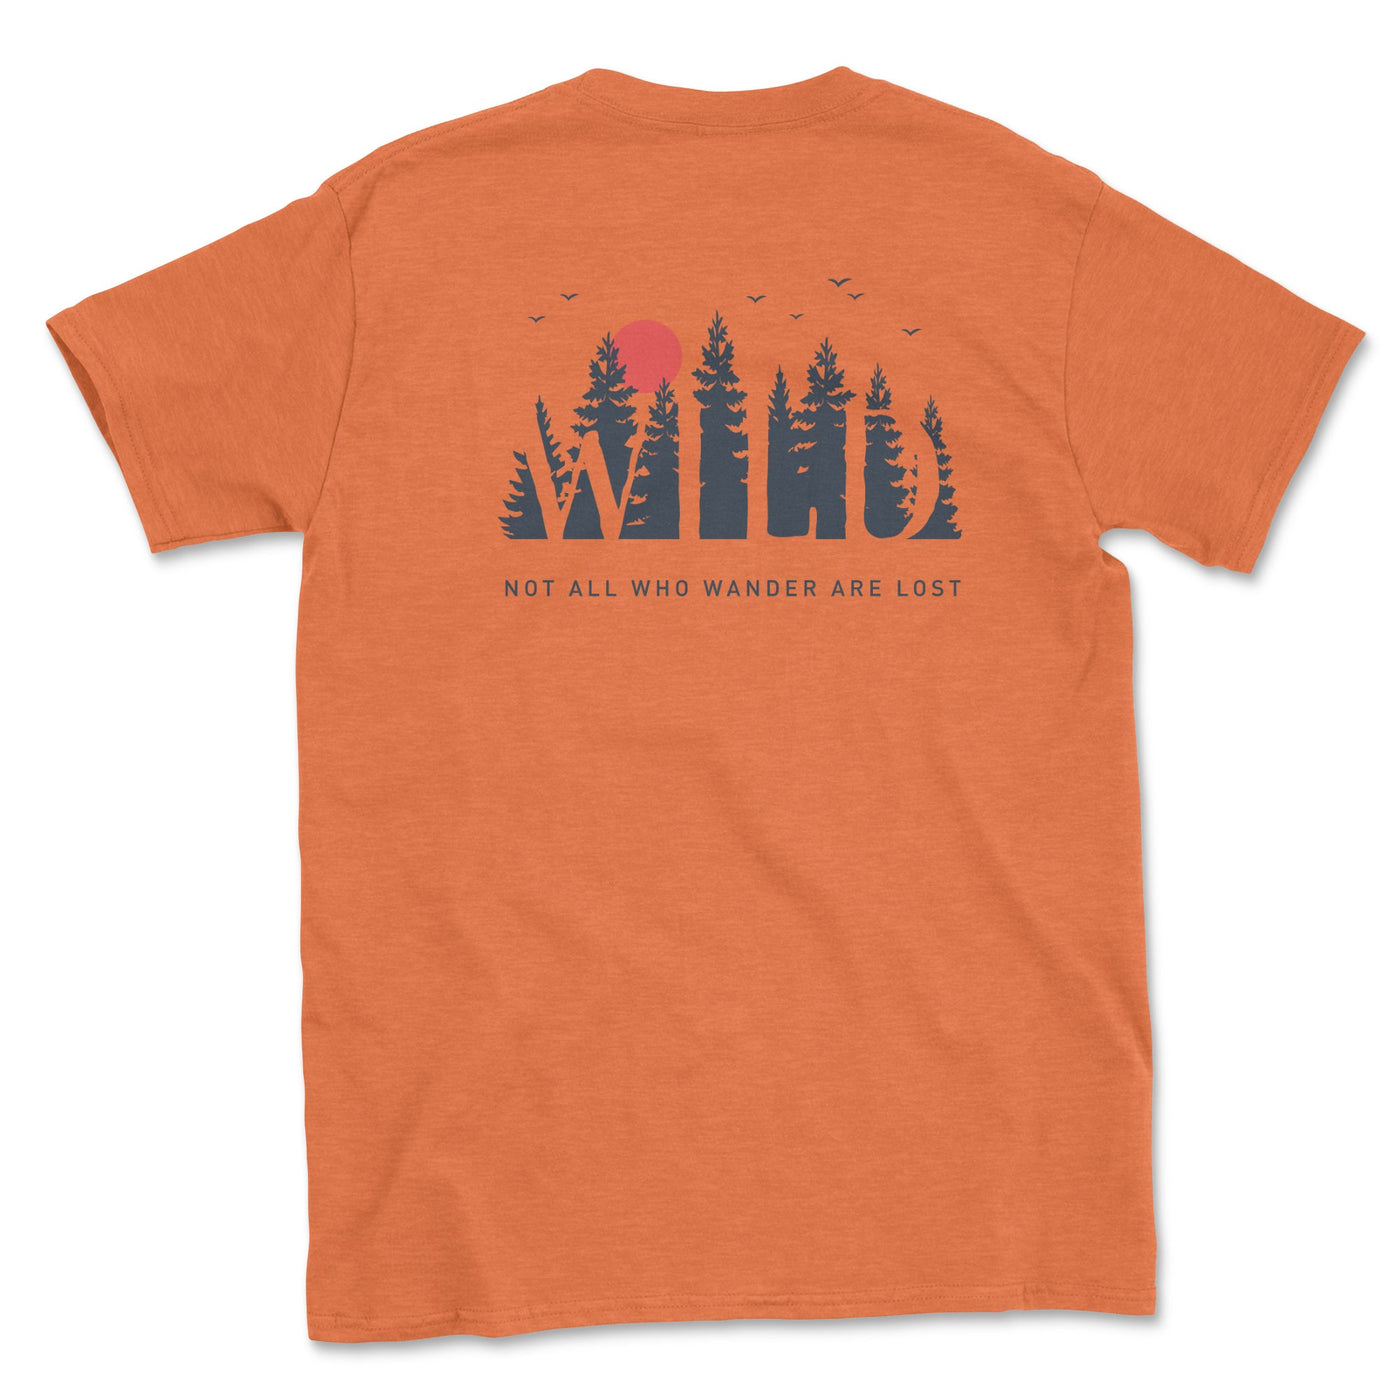 Not All that Wander are Lost Graphic Tee Shirt - Goats Trail Off-Road Apparel Company